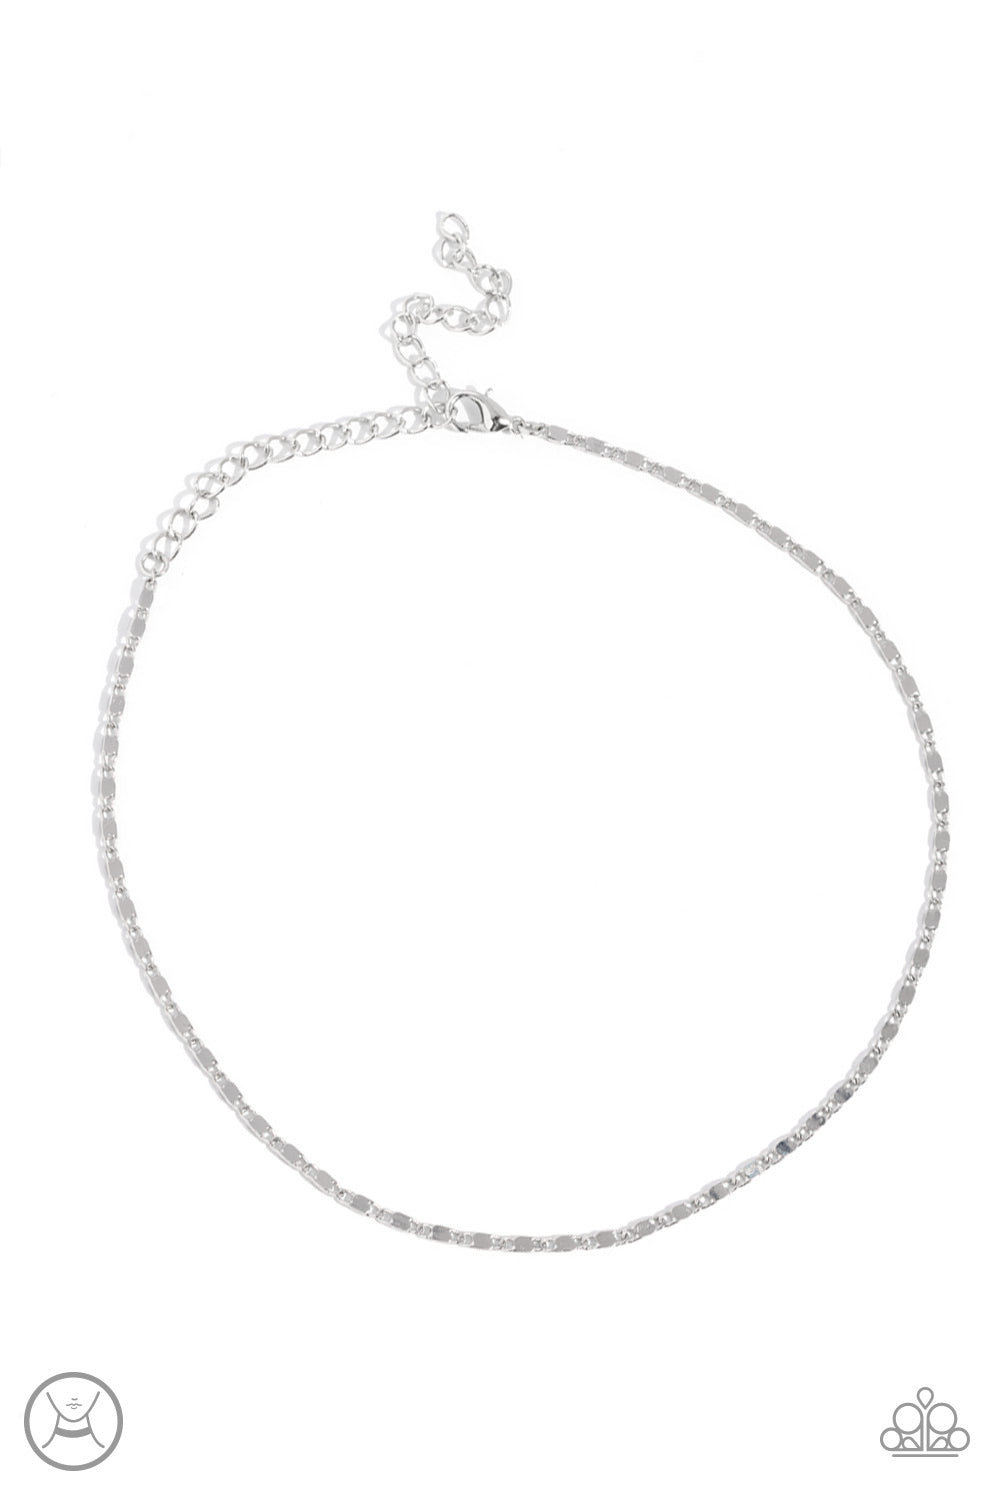 Minimalist Maiden Paparazzi Accessories Necklaces with Earrings - Silver